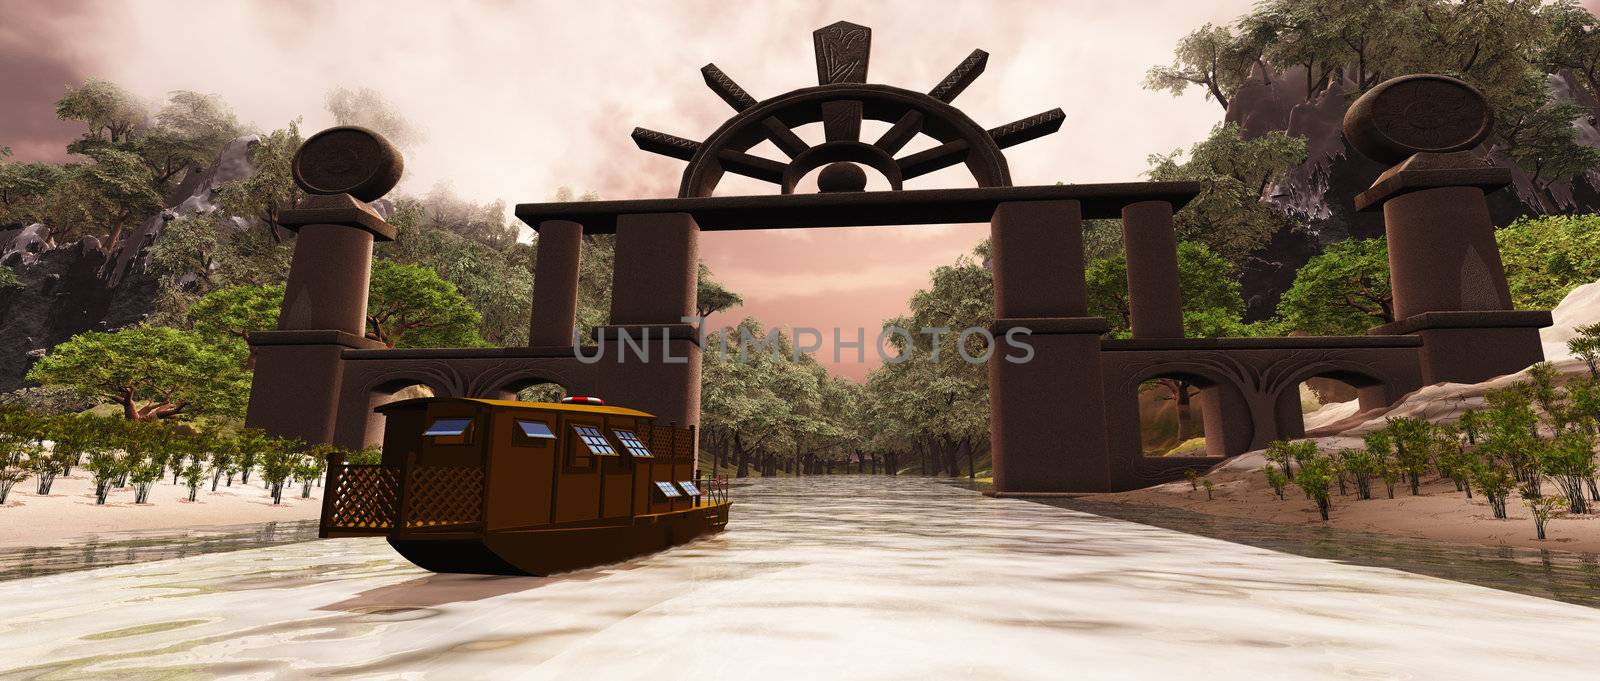 A junk boat travels under a gate to a mysterious gorge.